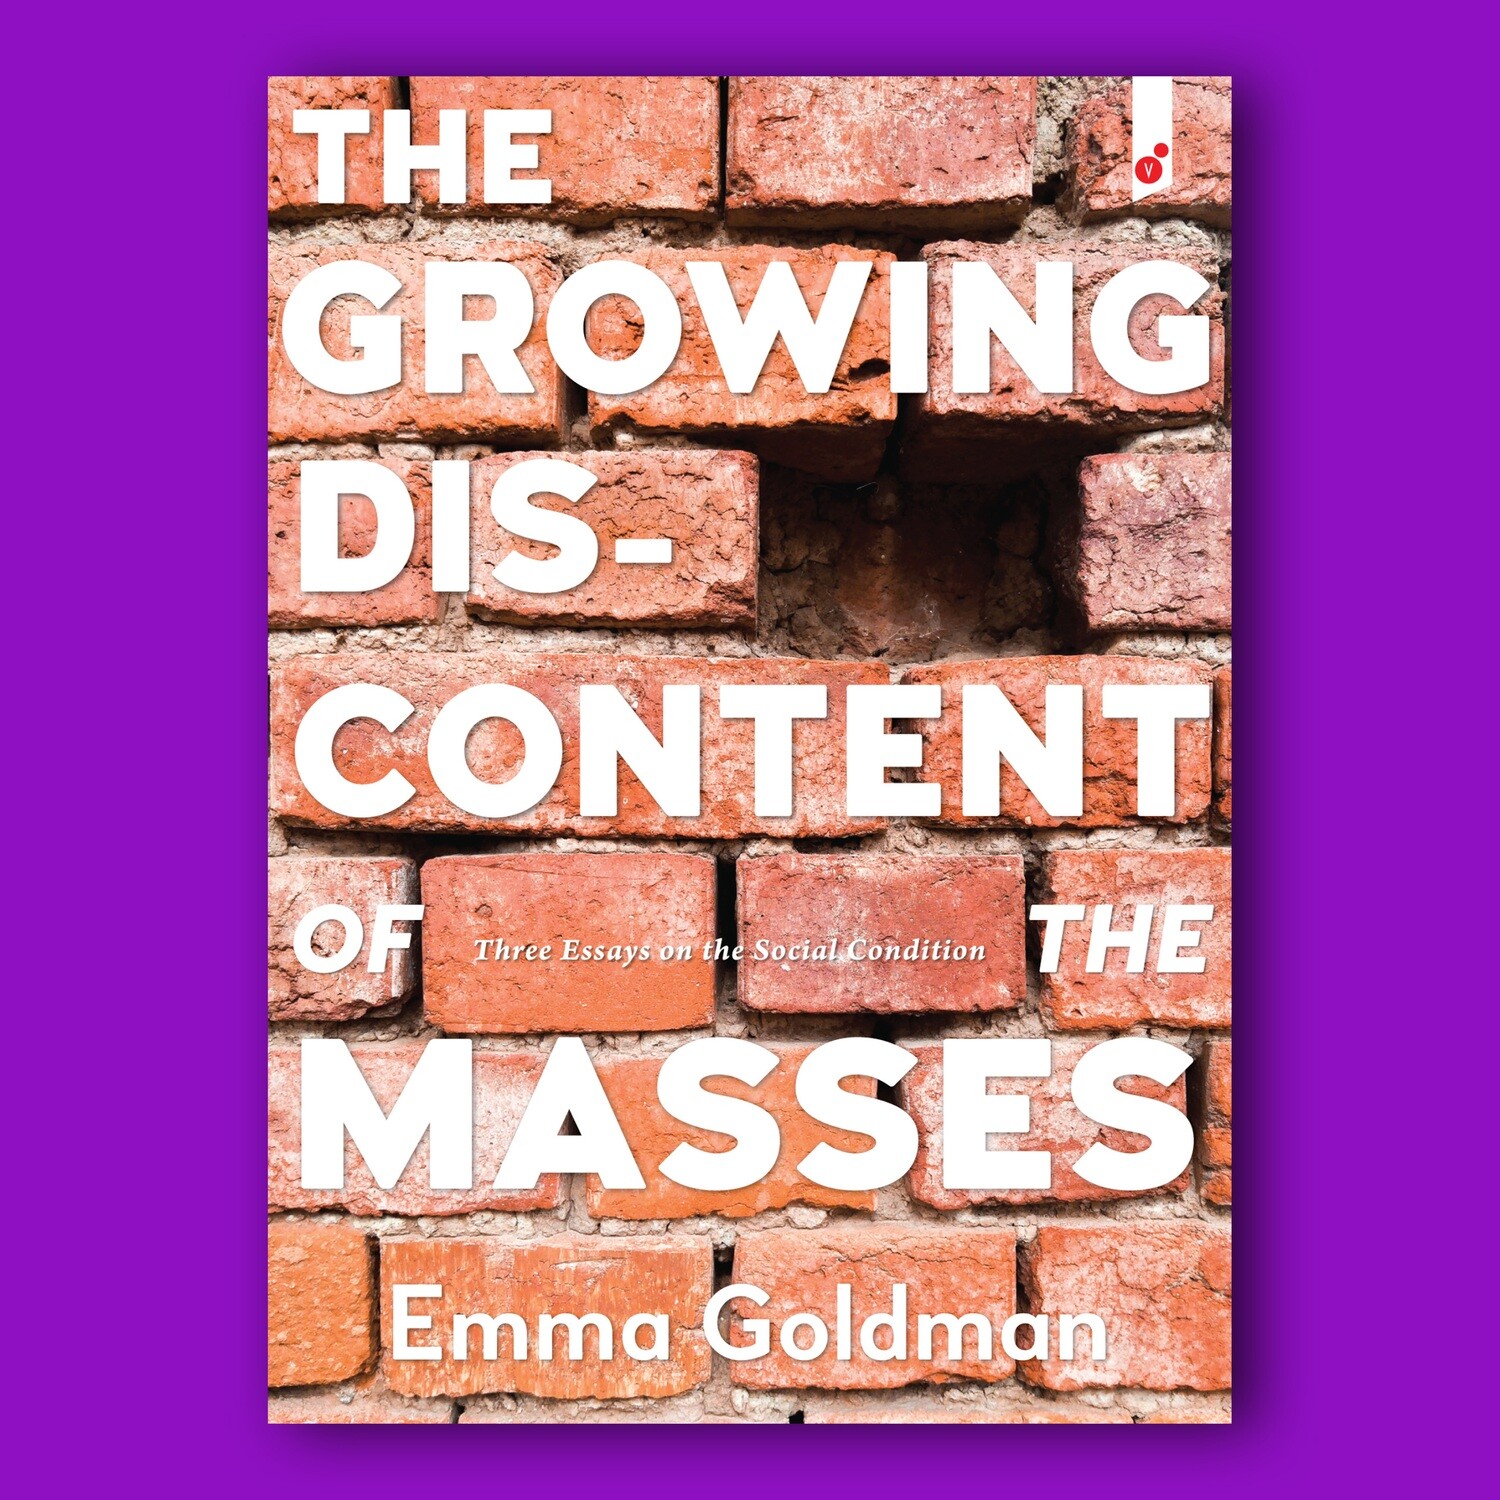 Growing Discontent Of The Masses: Three Essays On The Social Condition - Book by Emma Goldman